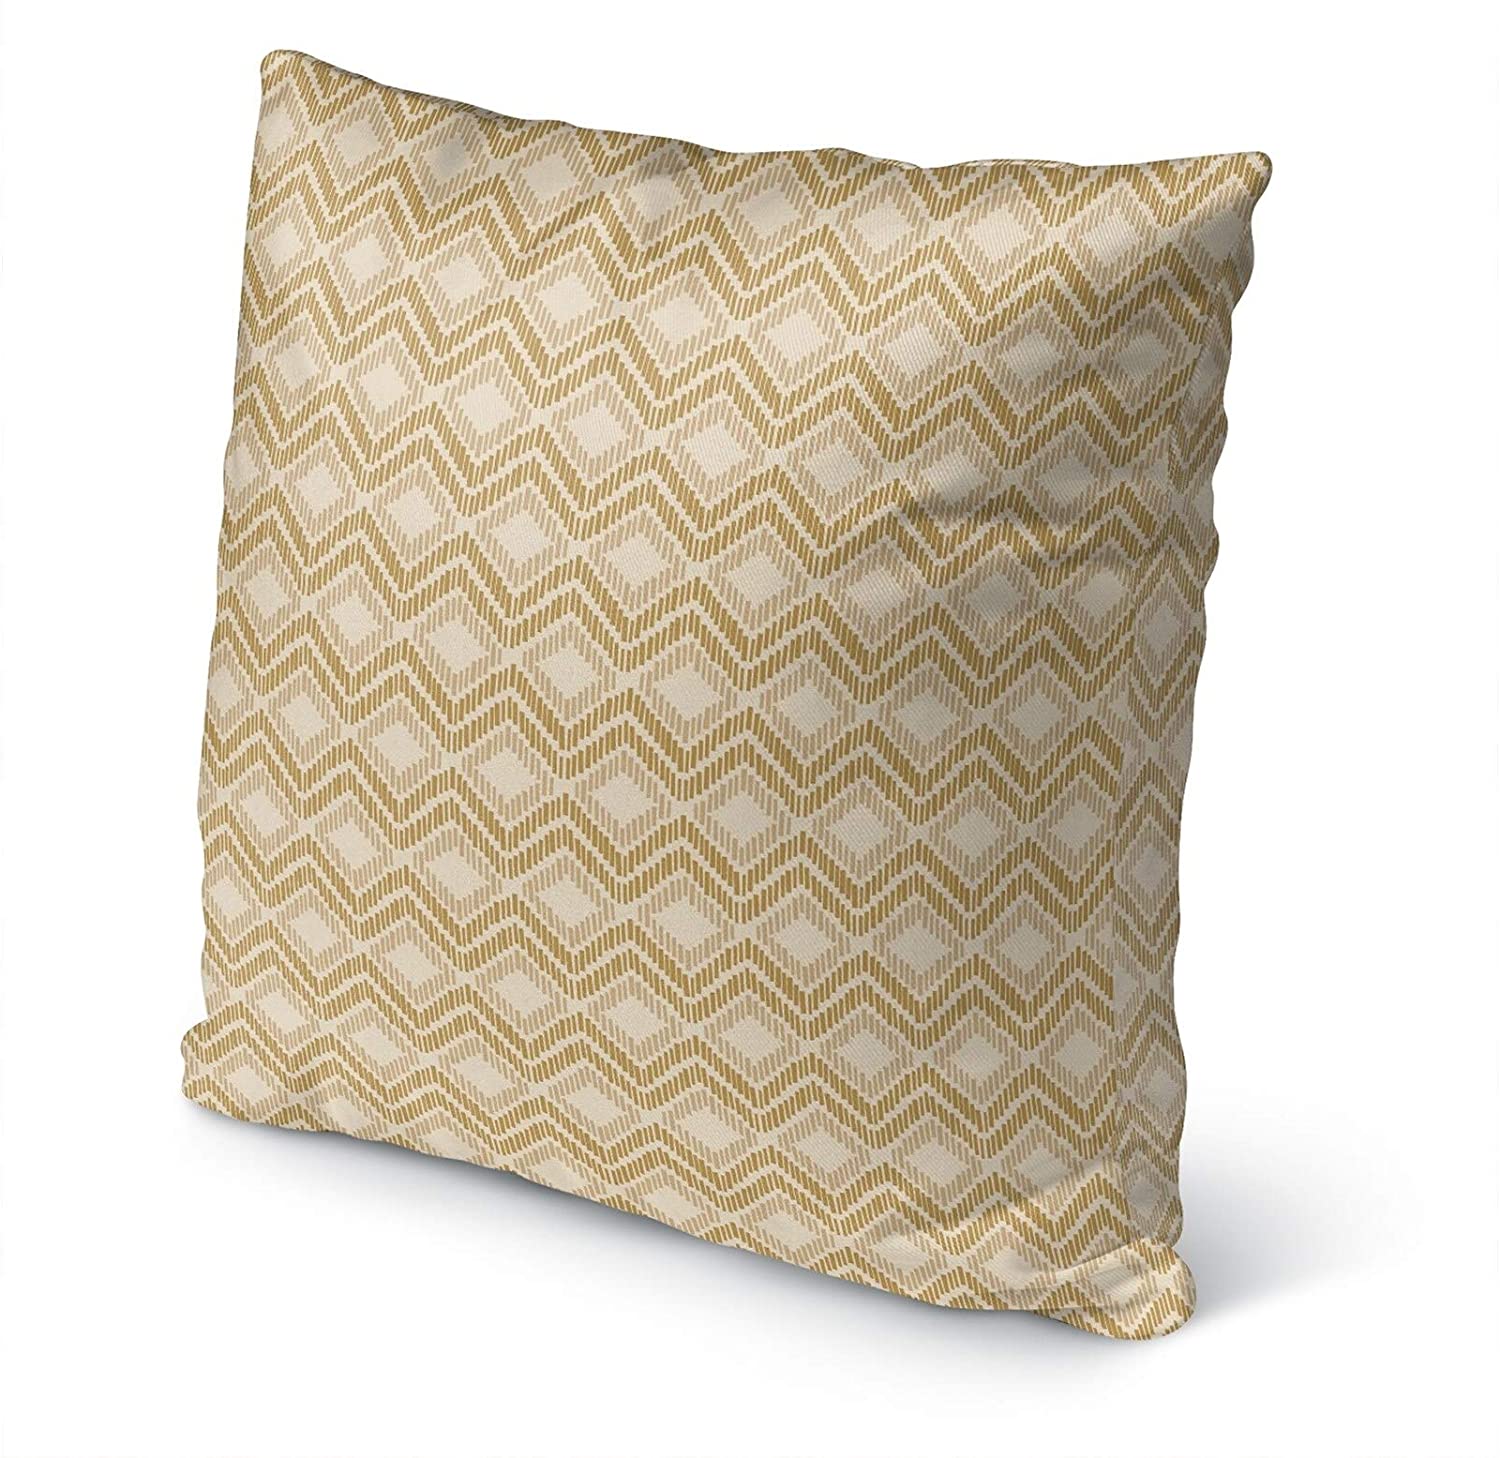 Retreat Sand Indoor|Outdoor Pillow by Tiffany N/ 18x18 Geometric Modern Contemporary Polyester Removable Cover